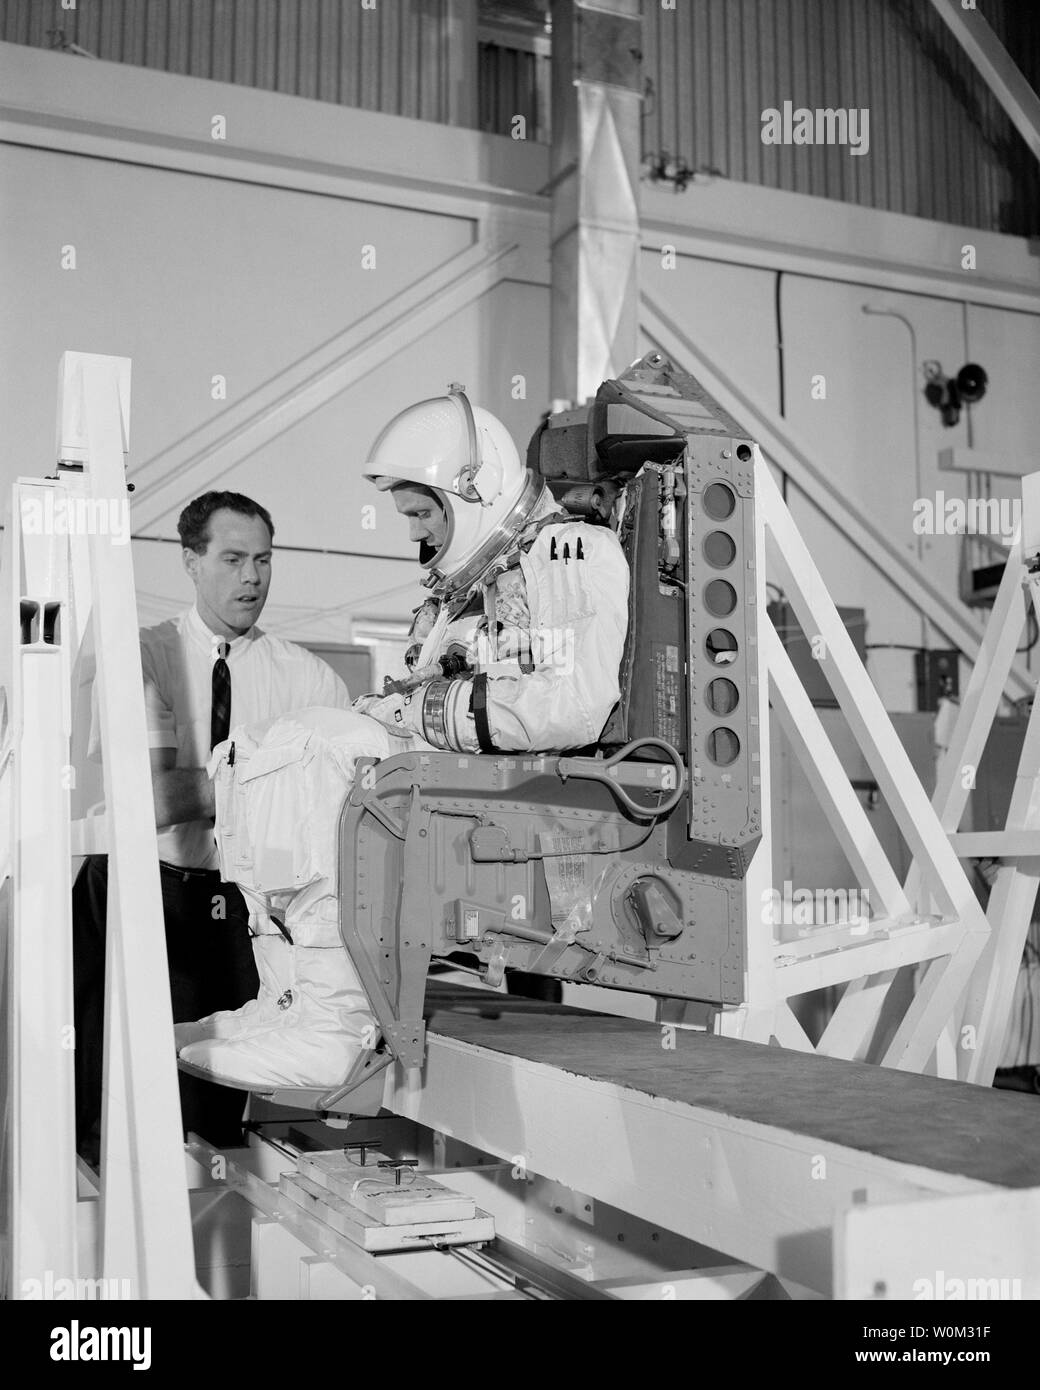 NASA astronaut Neil Armstrong undergoes weight and balance tests in the Pyrotechnic Installation Building, at Kennedy Space Center, Florida, on February 18, 1966. March 16, 2016 marks the 50th anniversary of NASA's Gemini 8 mission, the sixth manned spaceflight conducted during the United States' Project Gemini program. The primary objective of the mission, the successful docking of two spacecraft in orbit, a first in spaceflight, was a success though the crew would experience a critical in-space system failure, forcing them to abandon the mission prematurely. UPI Stock Photo